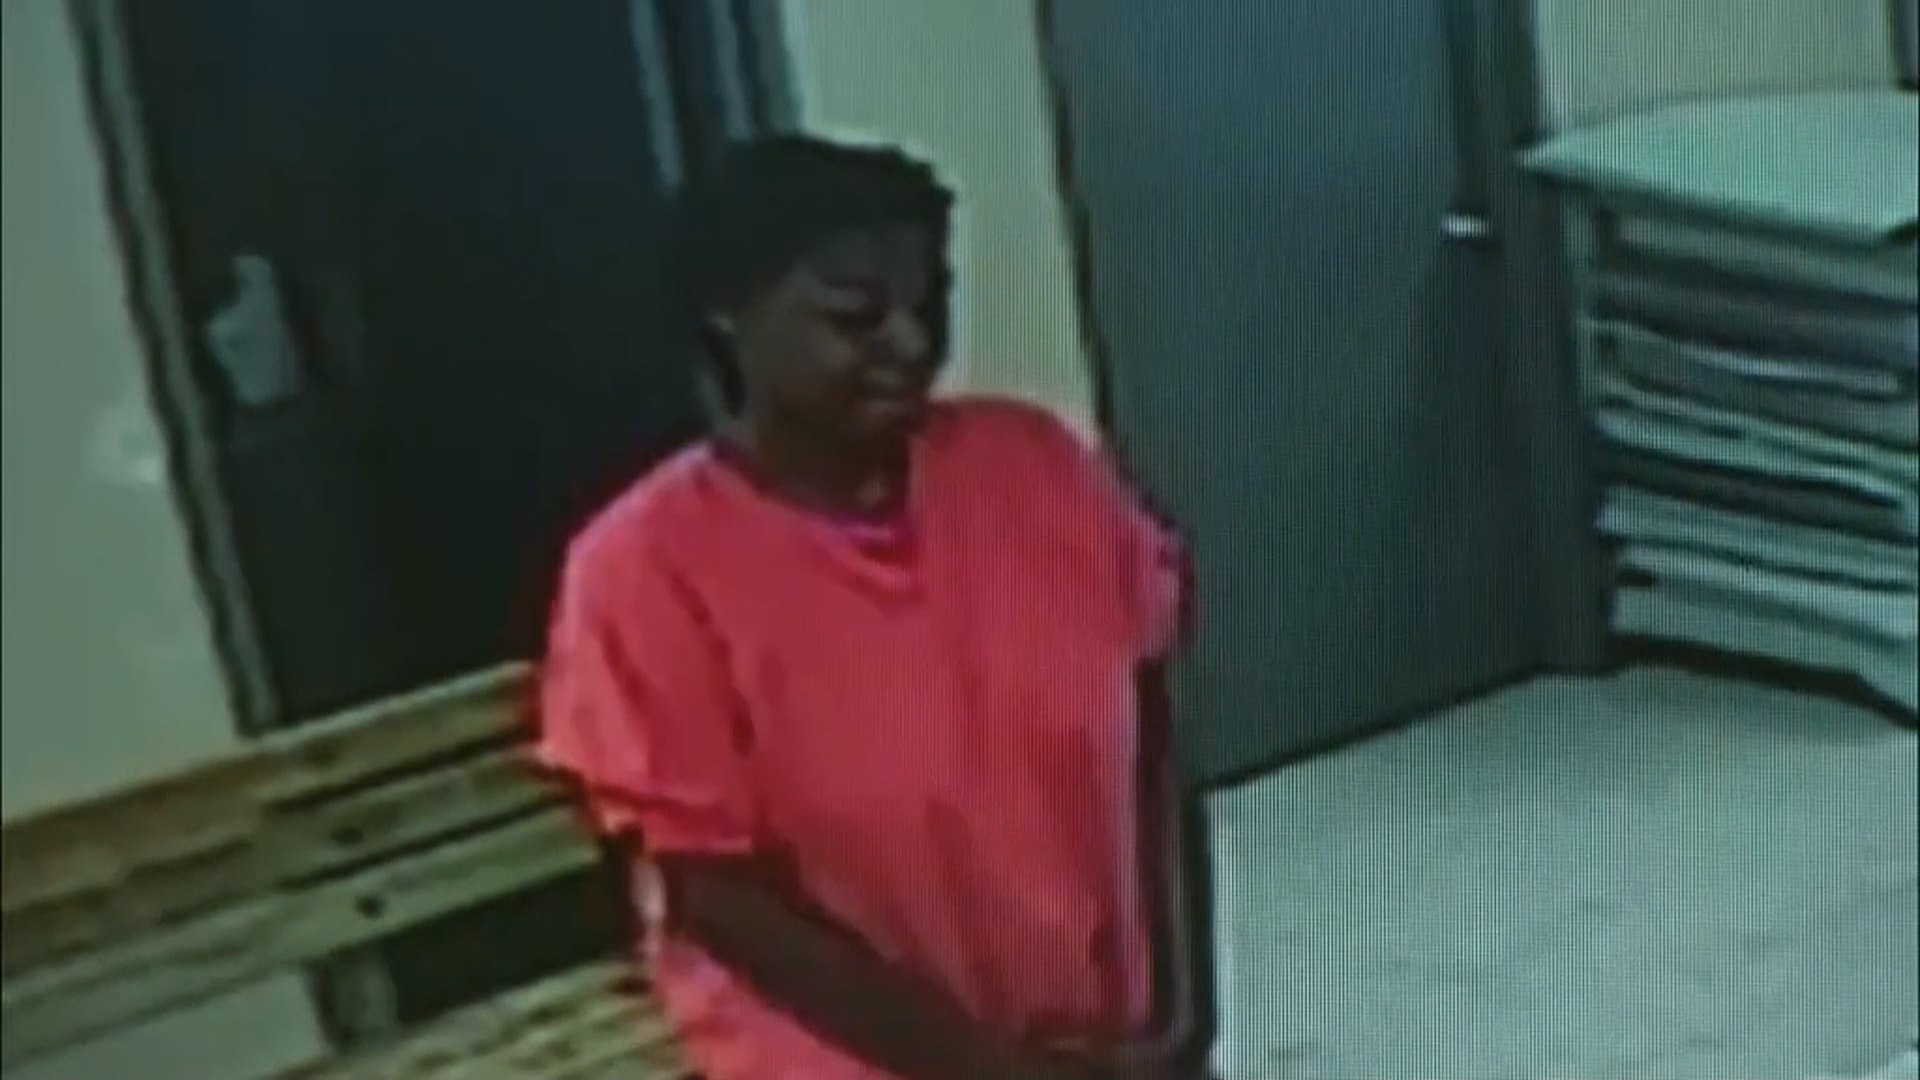 New Video Shows Sandra Bland in Jail After Arrest.